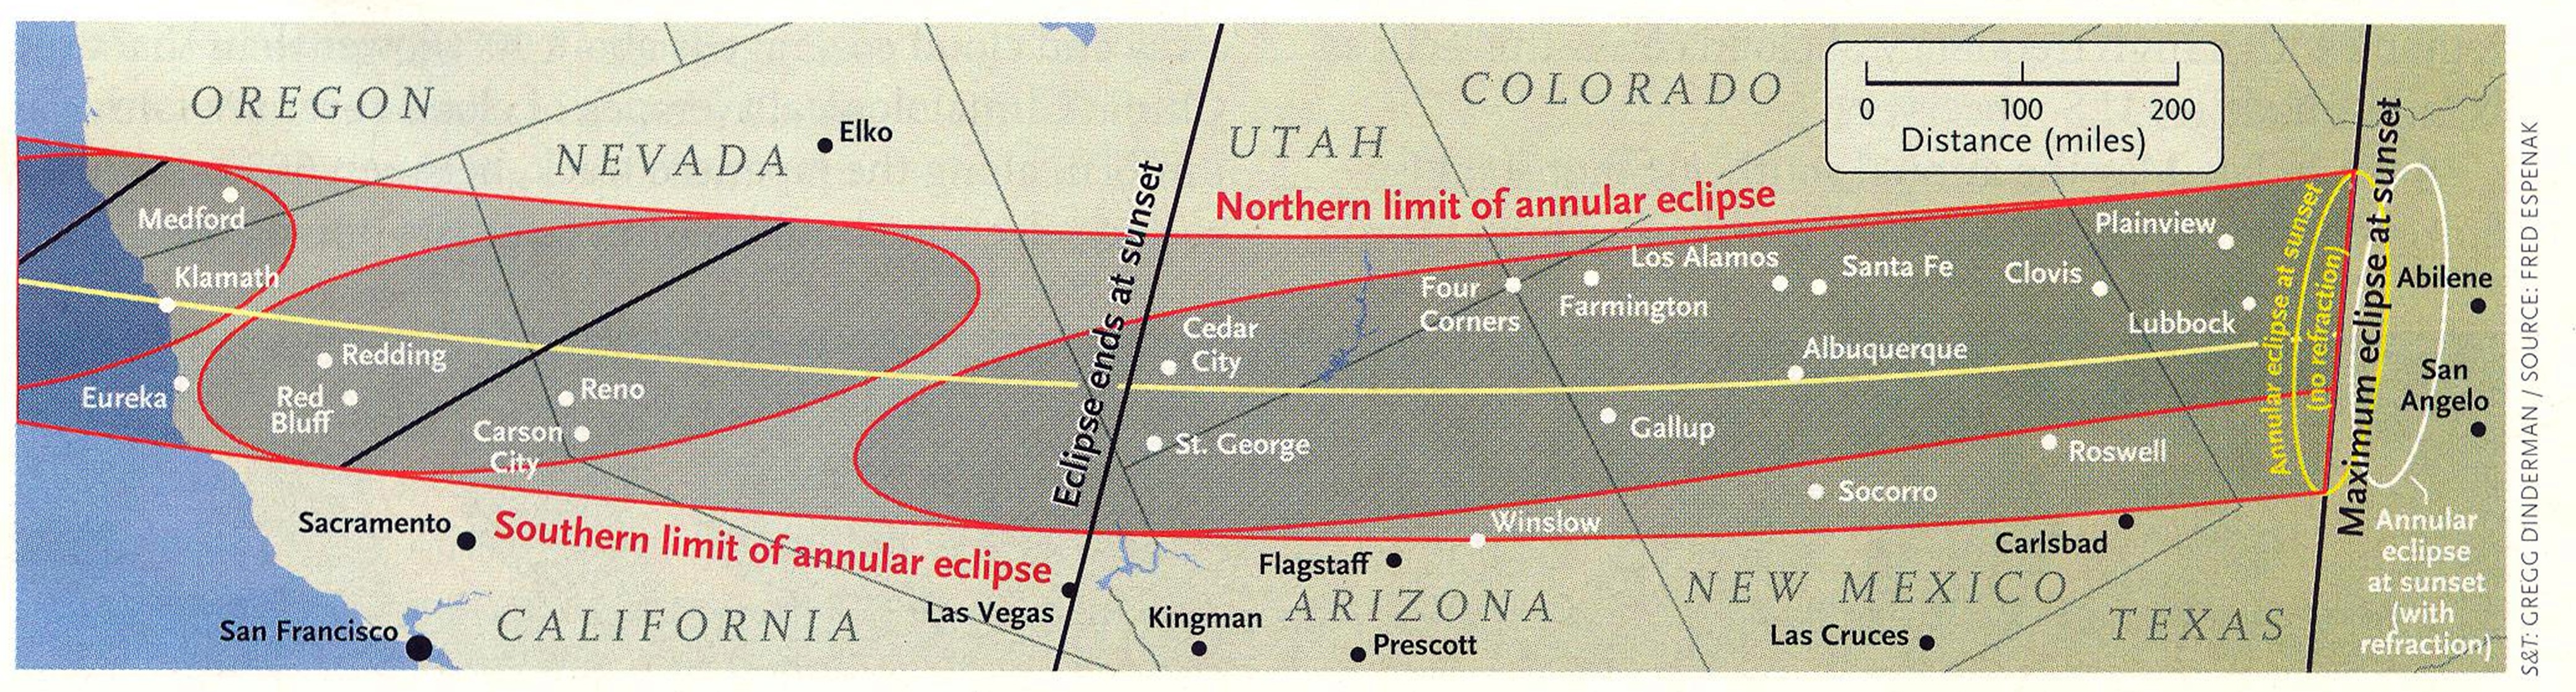 Path of May 20, 2012 annular eclipse